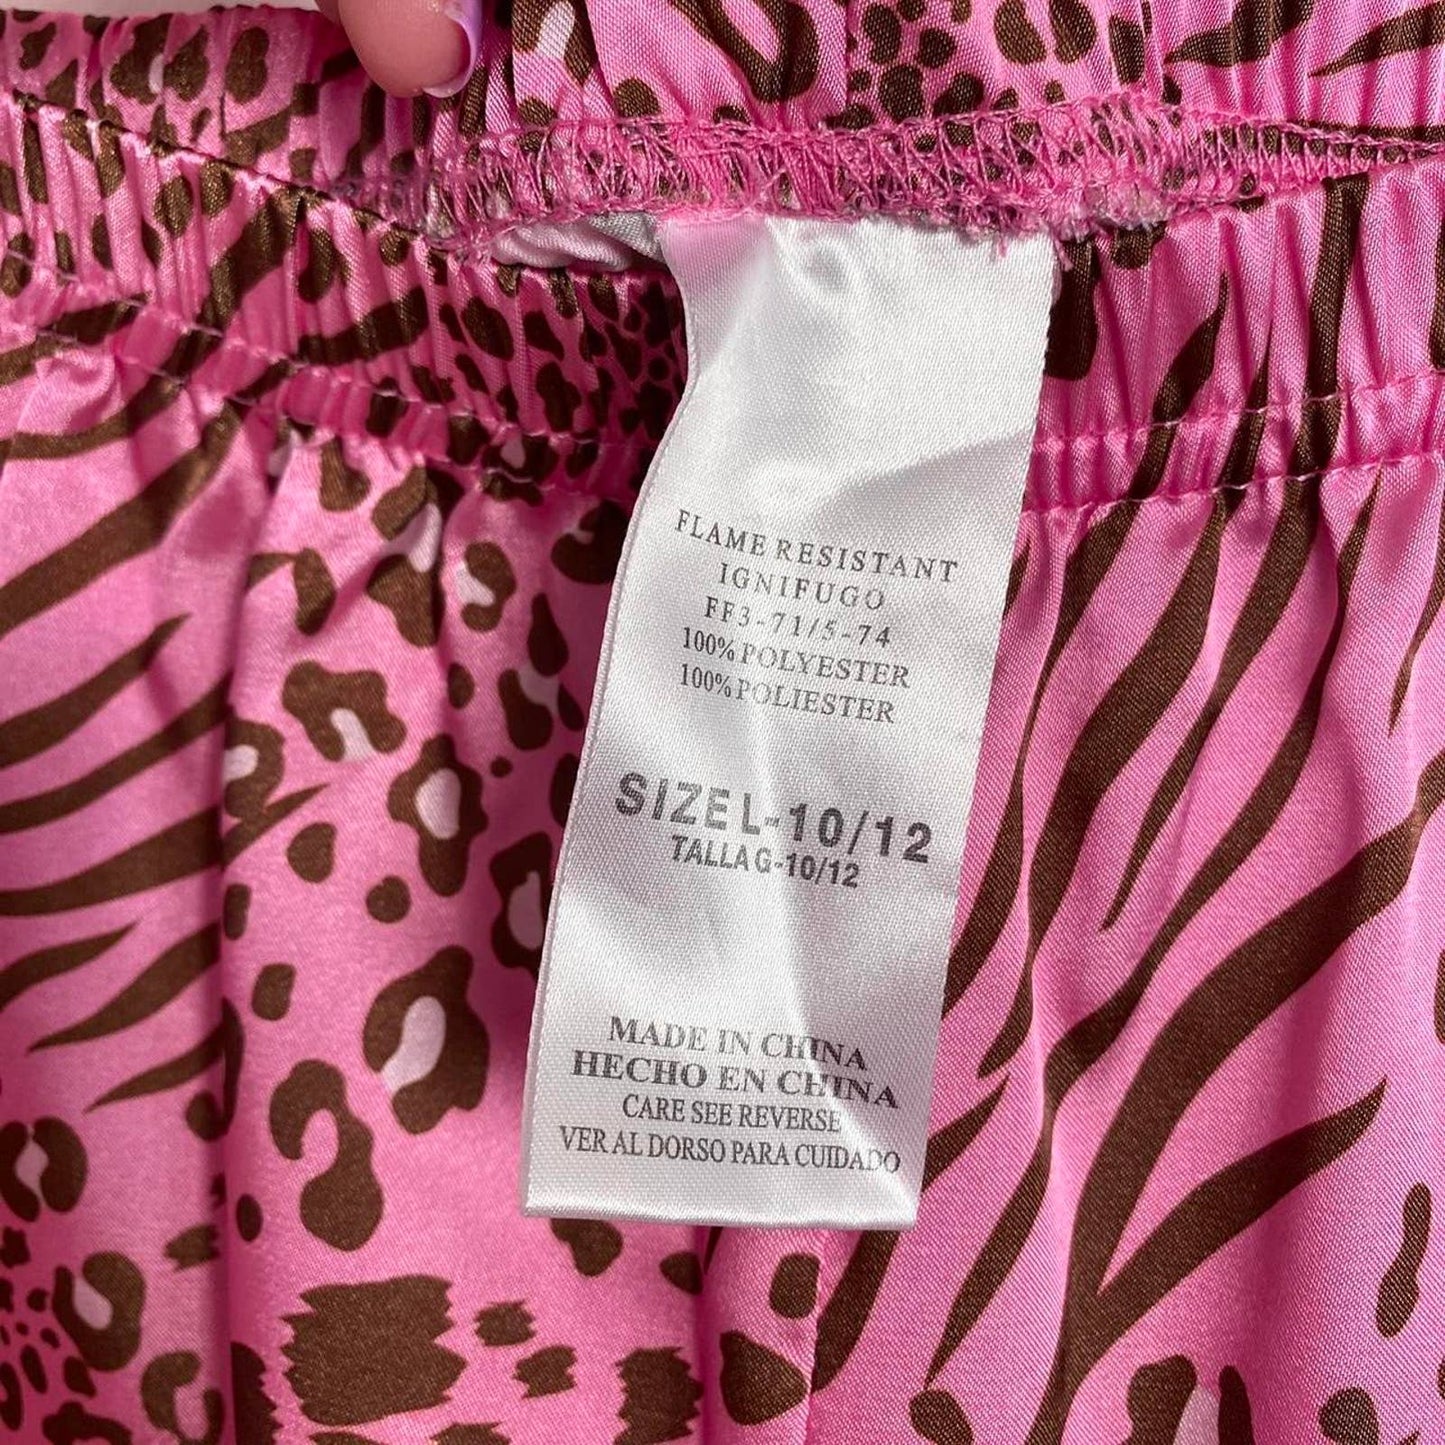 Secondhand Pink Leopard Print Satin Cropped Pants, Size Small